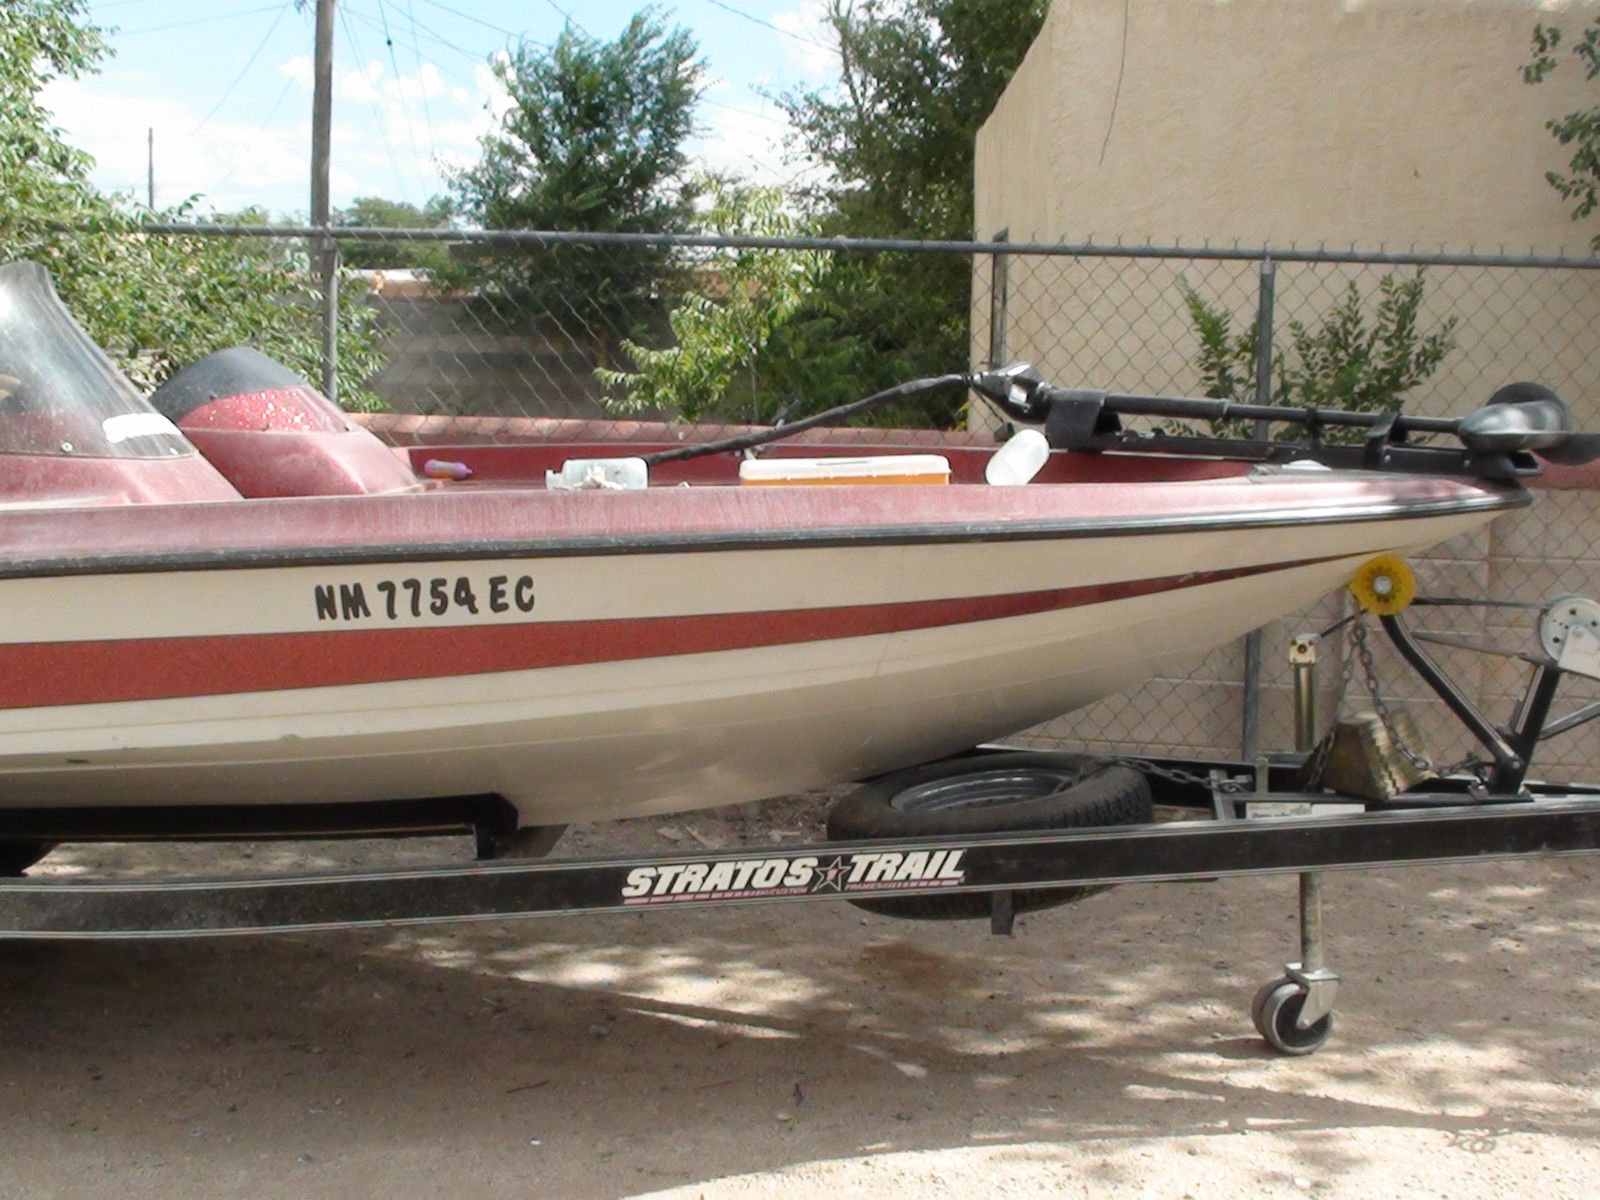 Stratos 278 1996 for sale for $5,500 - Boats-from-USA.com wiring harness for boats 